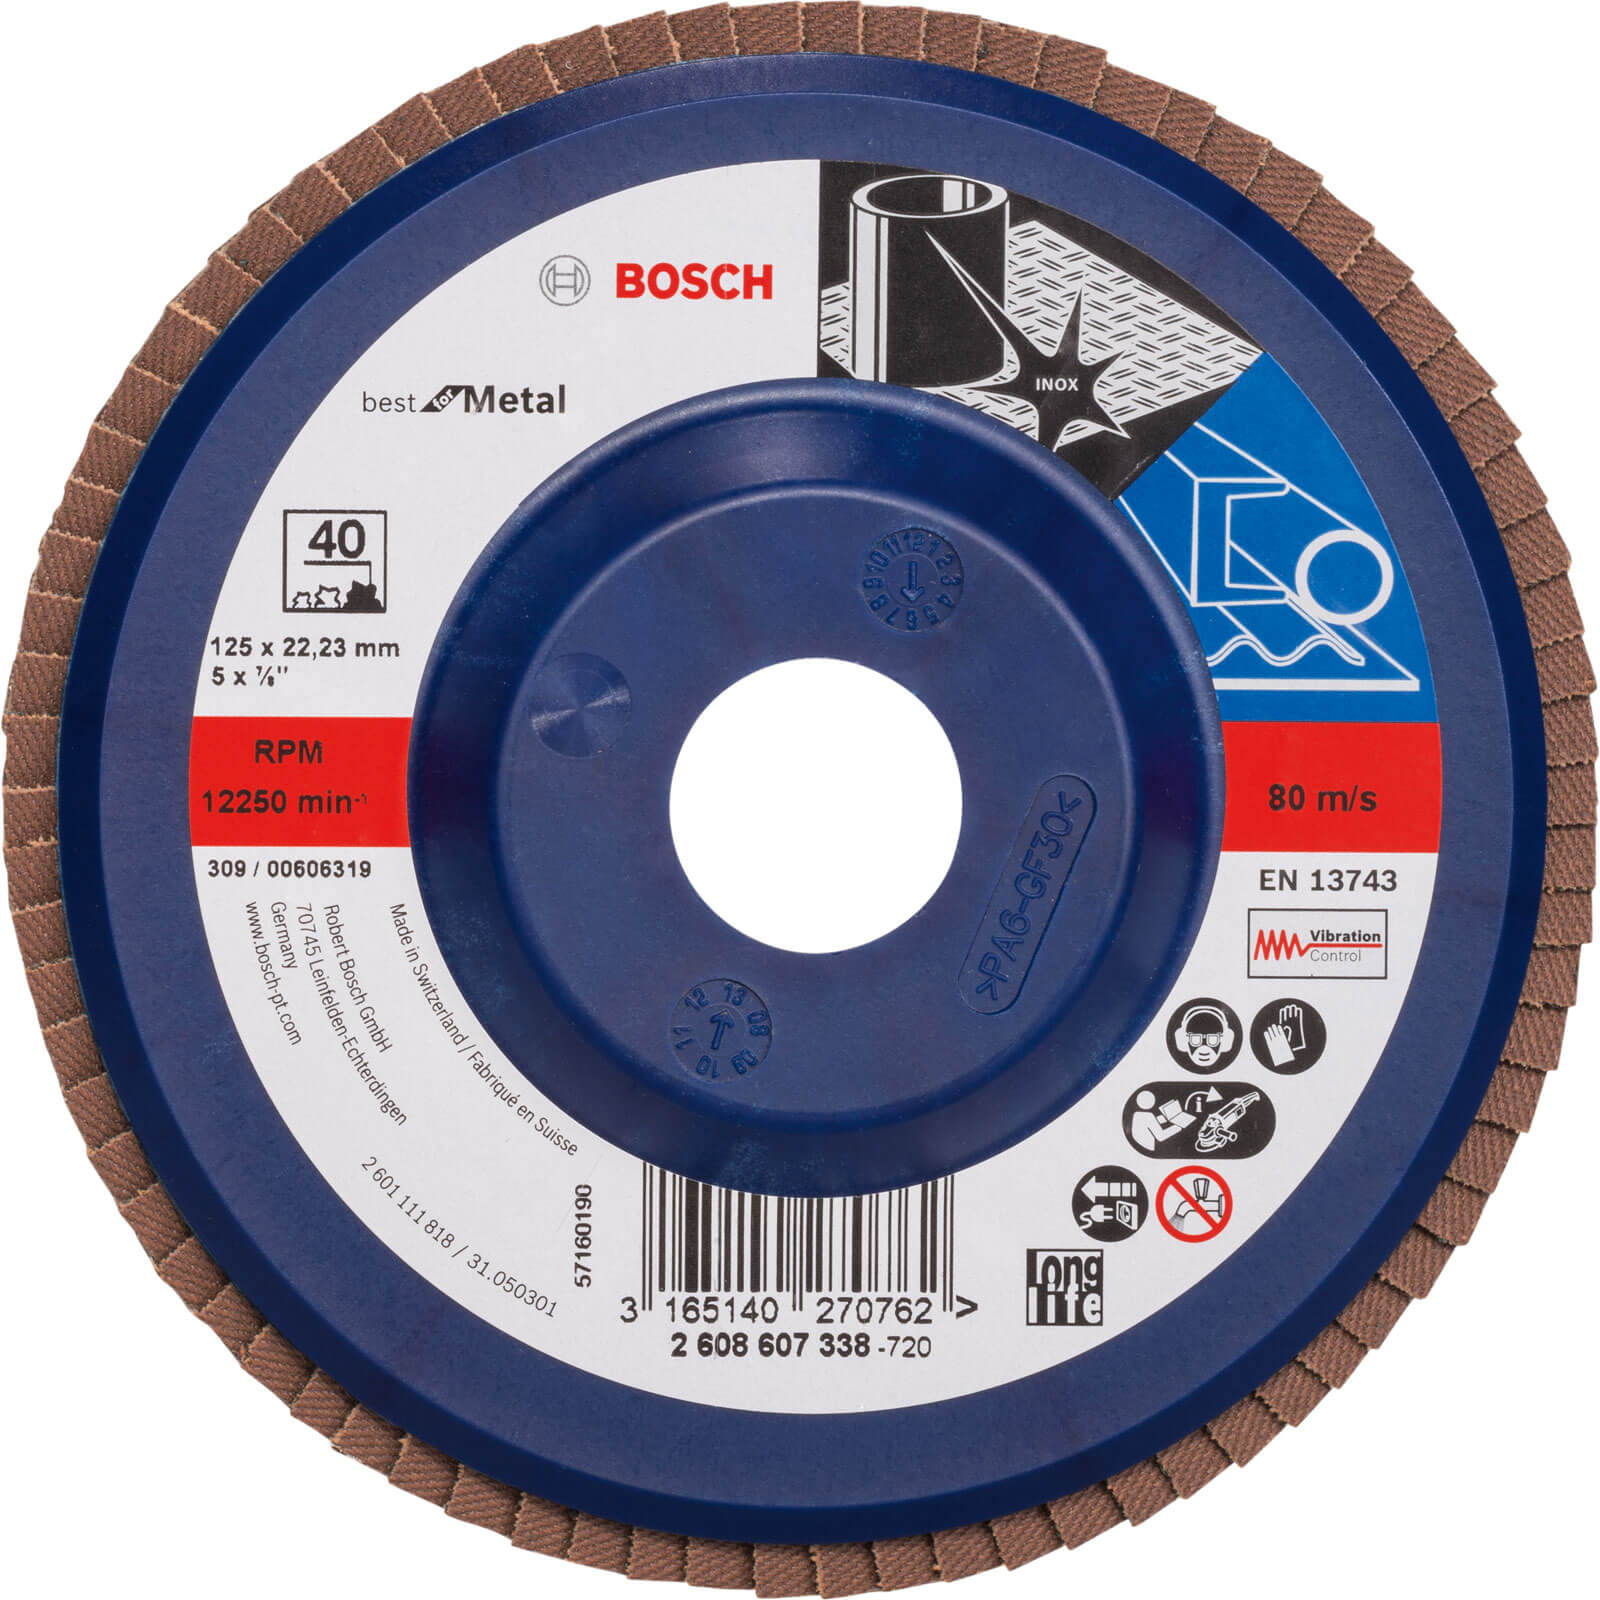 Bosch X571 Best for Metal Straight Flap Disc 115mm 60g Pack of 1